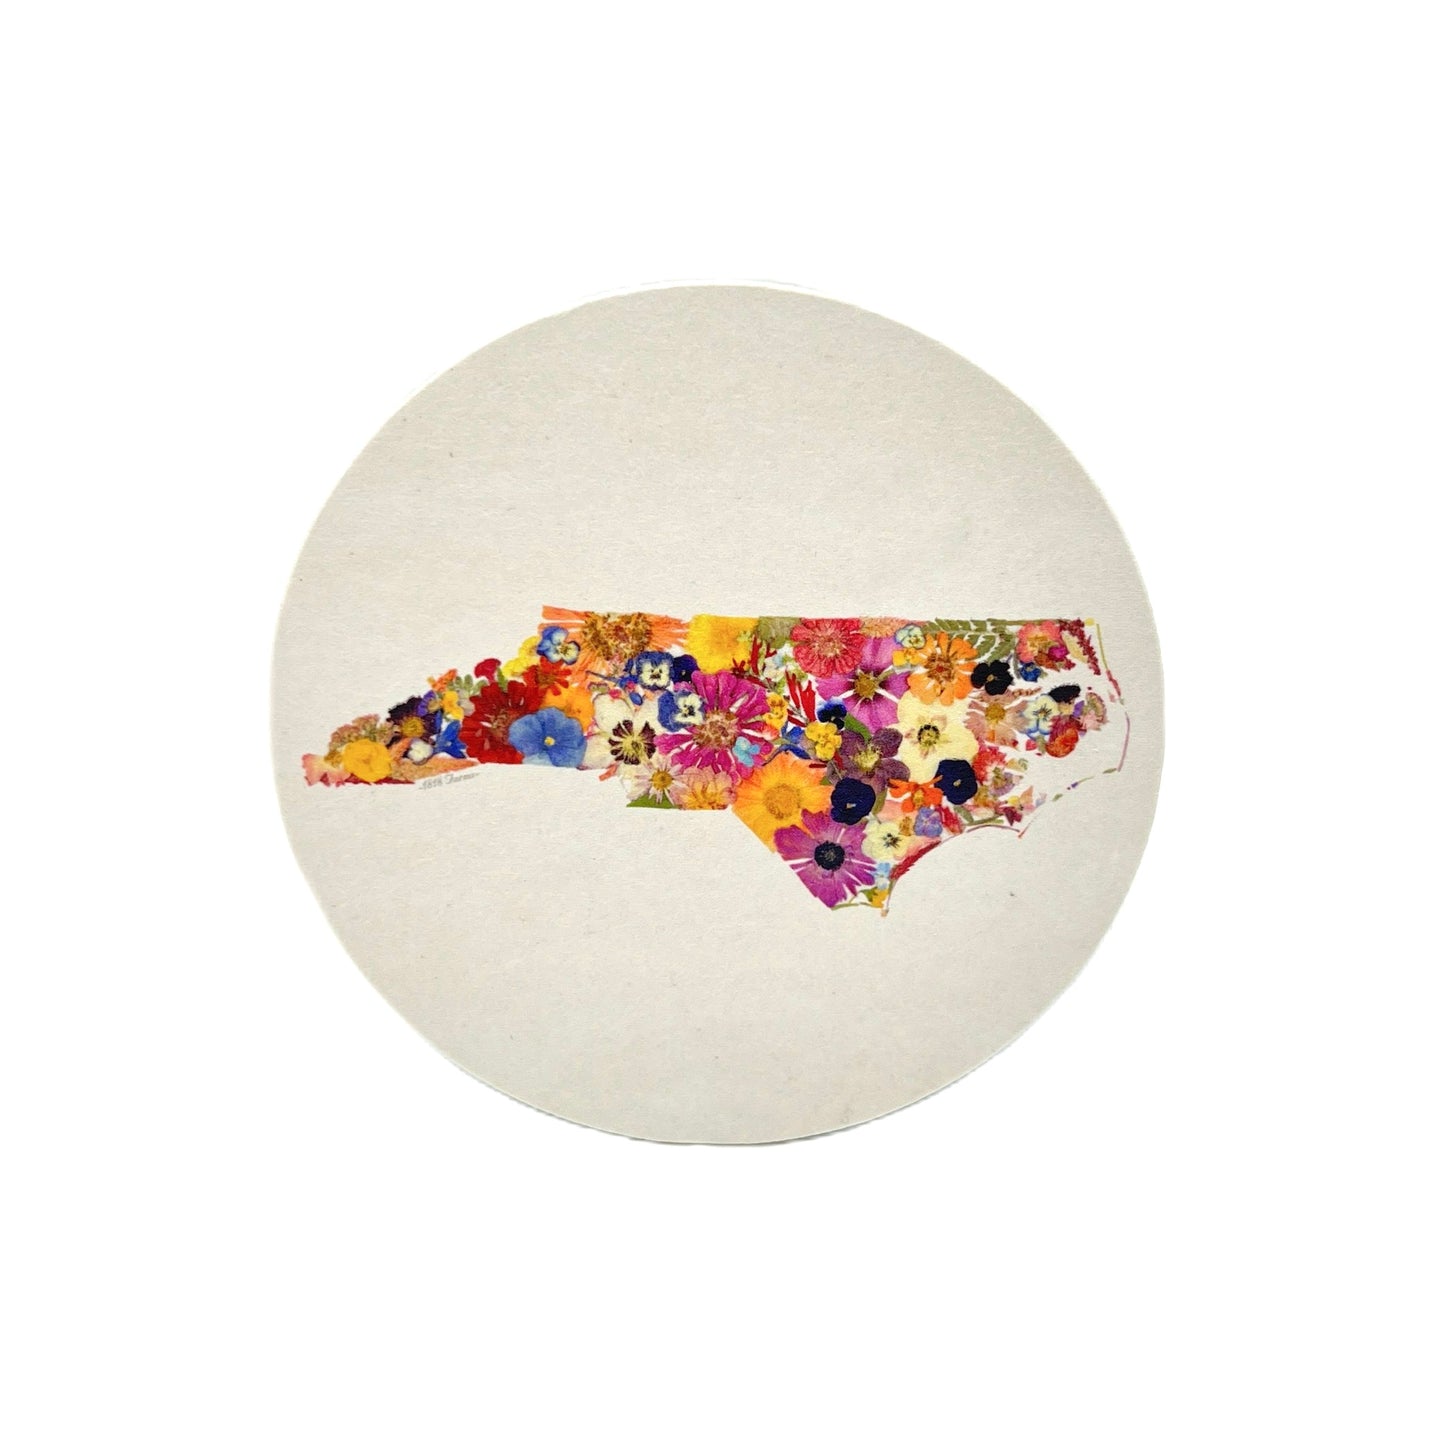 State Themed Drink Coasters (Set of 6) Featuring Dried, Pressed Flowers - "Where I Bloom" Collection Coaster 1818 Farms North Carolina  